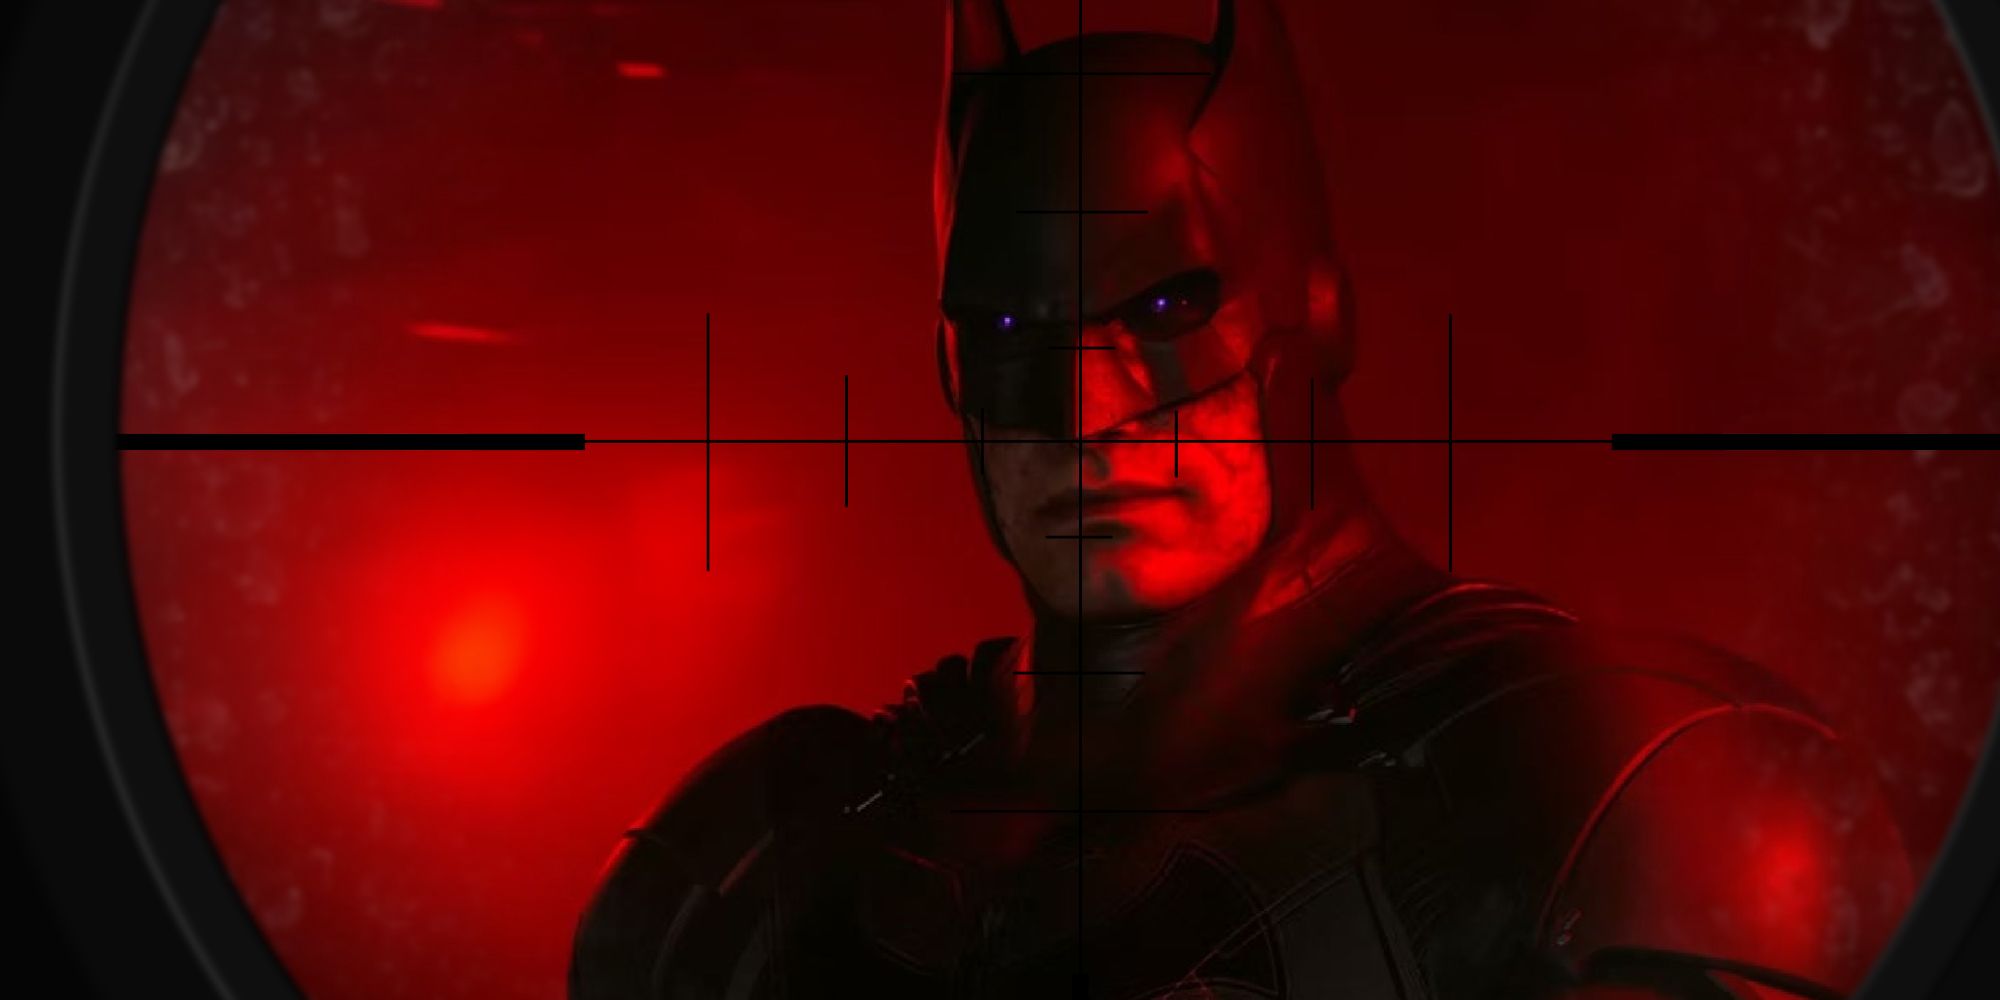 Sniper crosshair over Batman from Suicide Squad Kill the Justice League